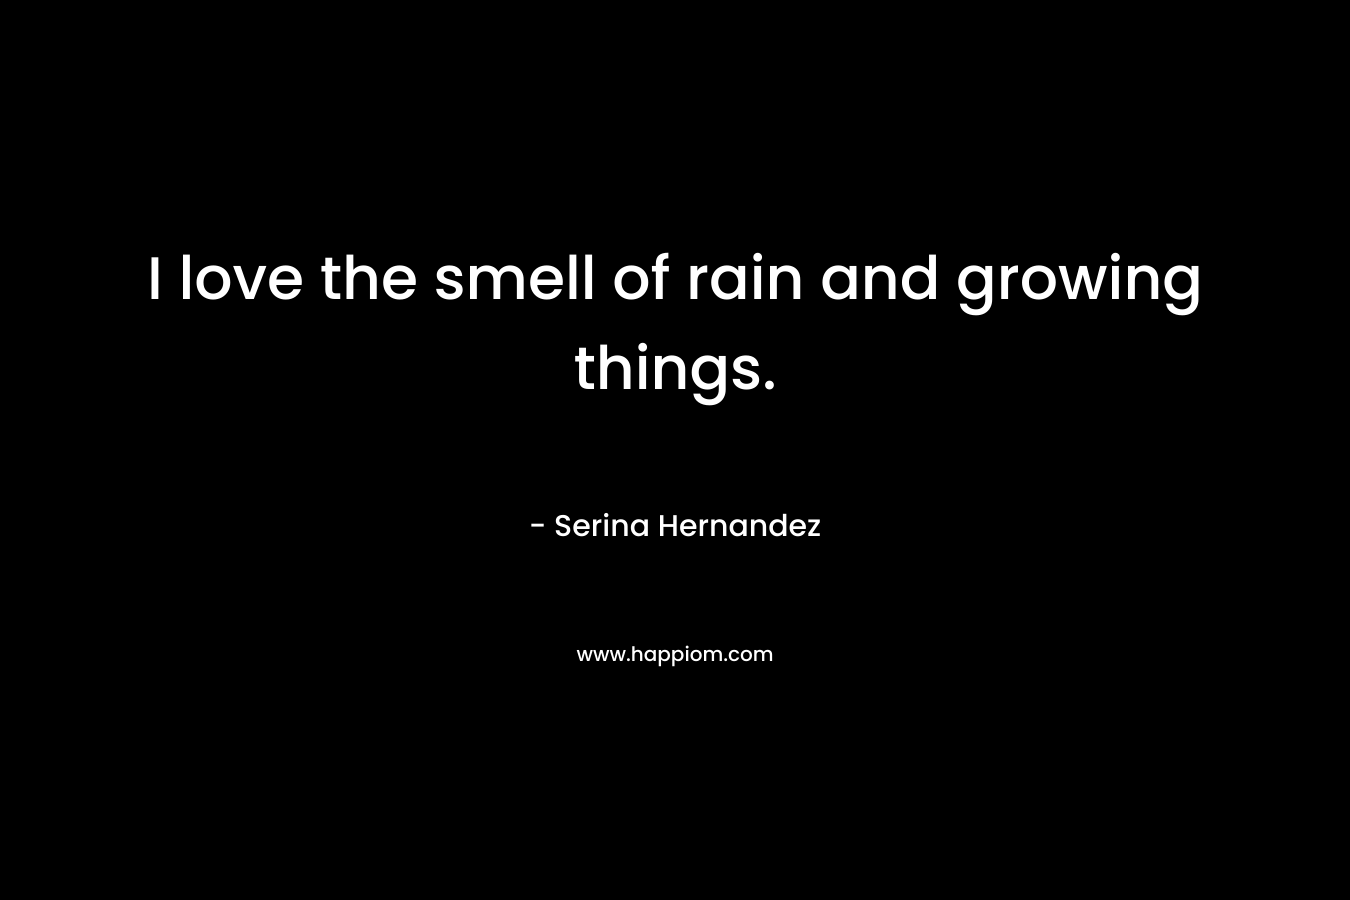 I love the smell of rain and growing things.